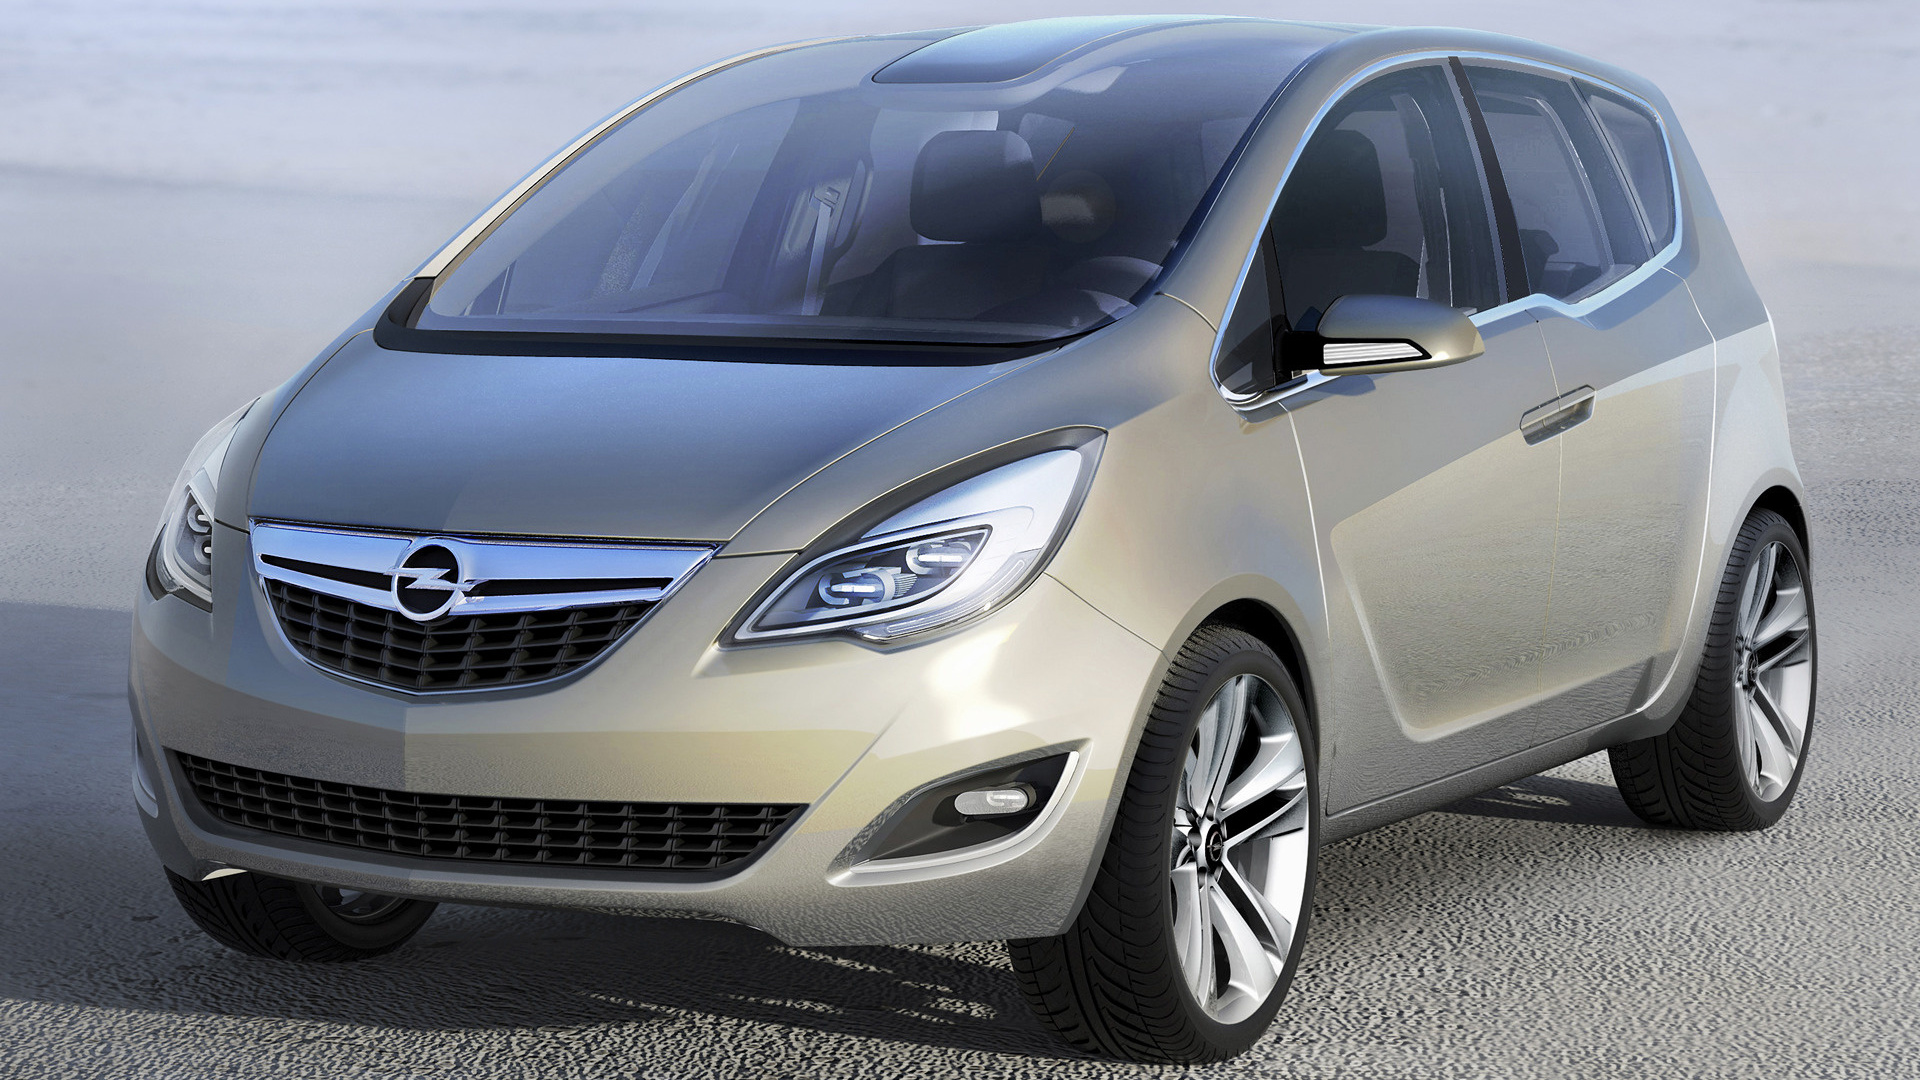 2008 Opel Meriva Concept - Wallpapers and HD Images